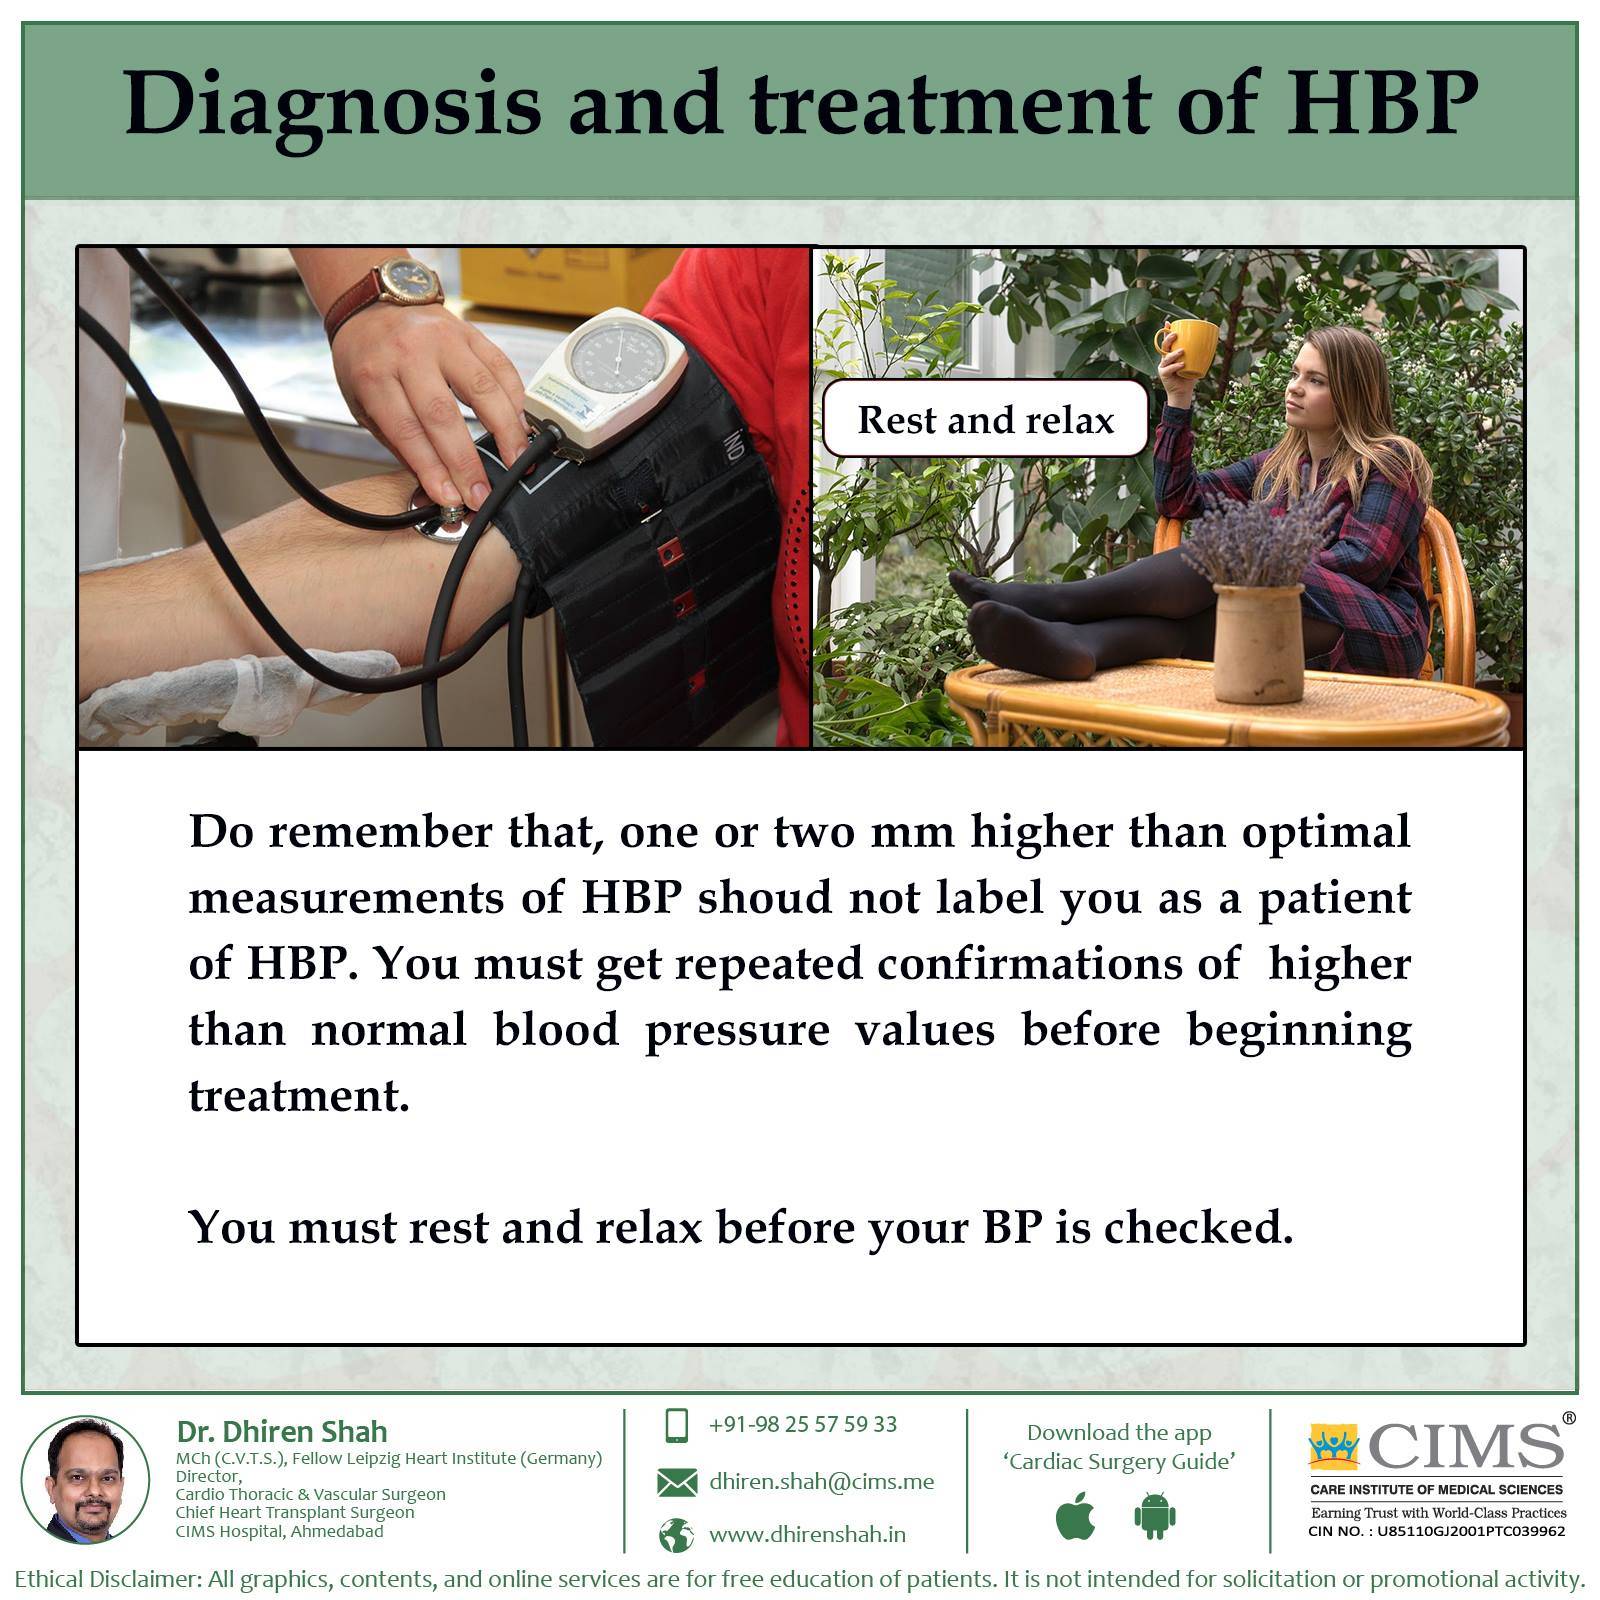 Diagnosis and treatment of HBP.